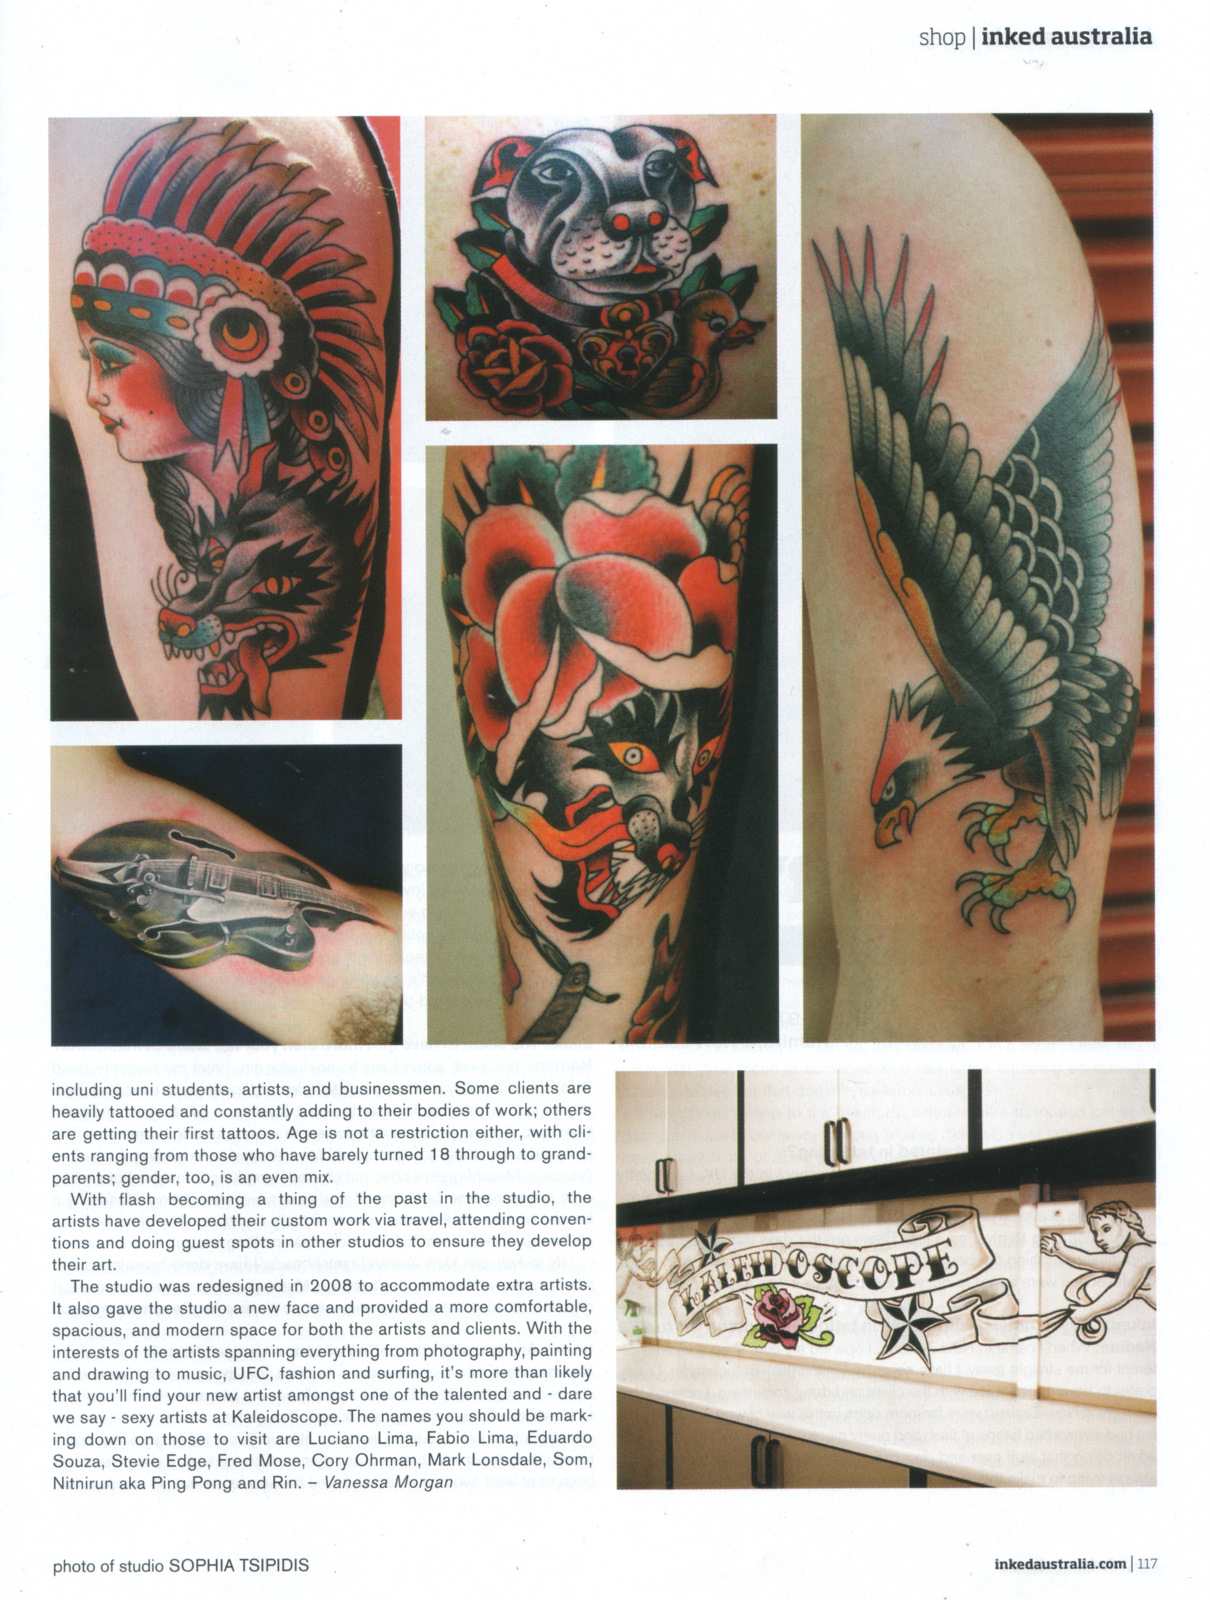 Fred Harris - Sydney Tattoo Studio | State Library of NSW